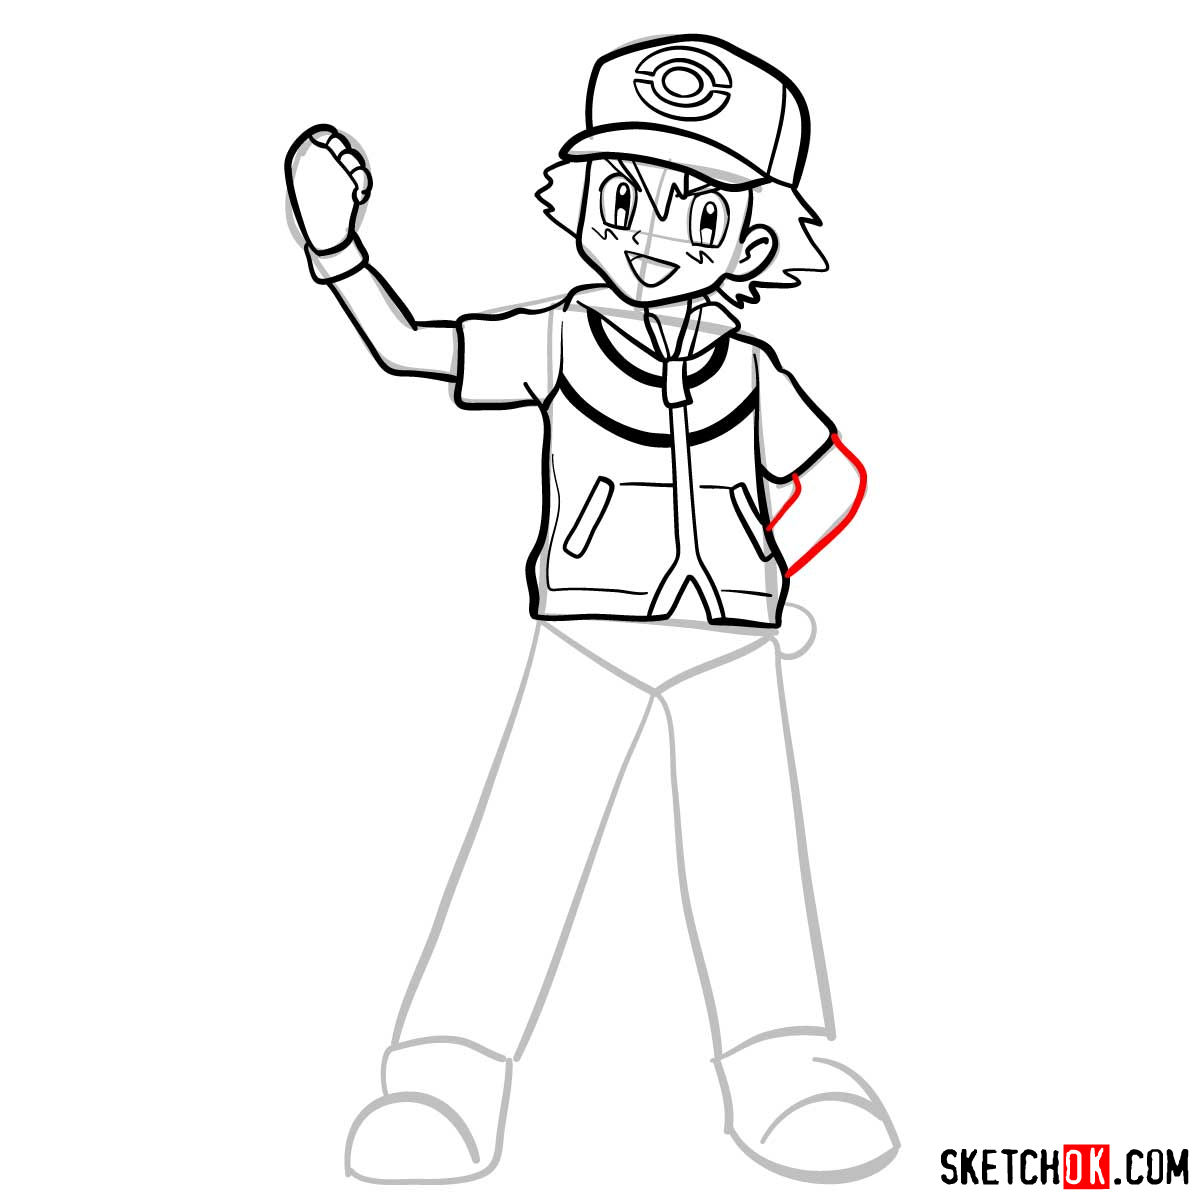 How to draw Ash from Pokemon anime - step 11